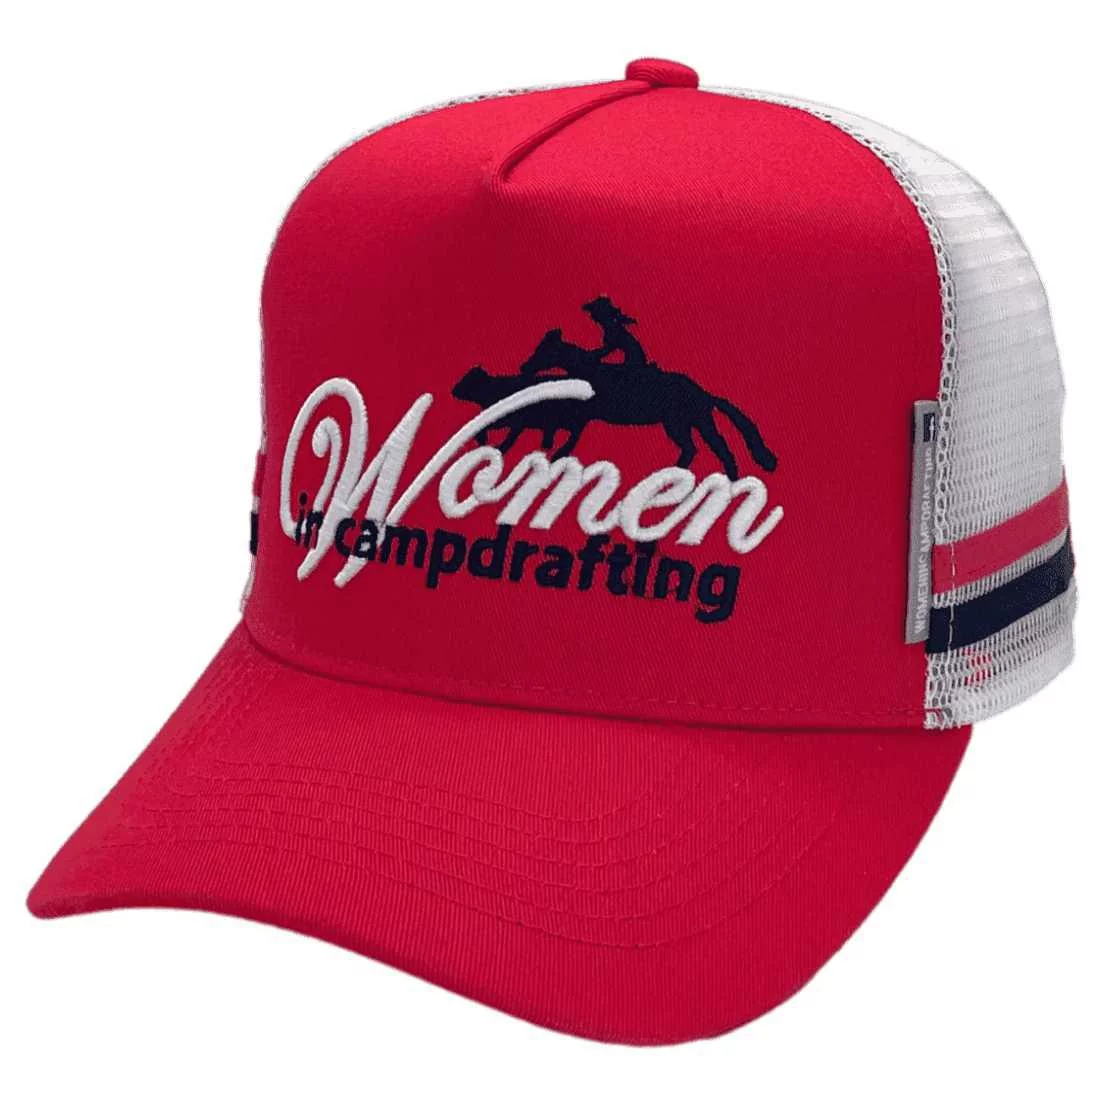 Women In Campdrafting HP Basic Aussie Trucker Hat with Australian Head Fit Crown and Double Side Bands Red White